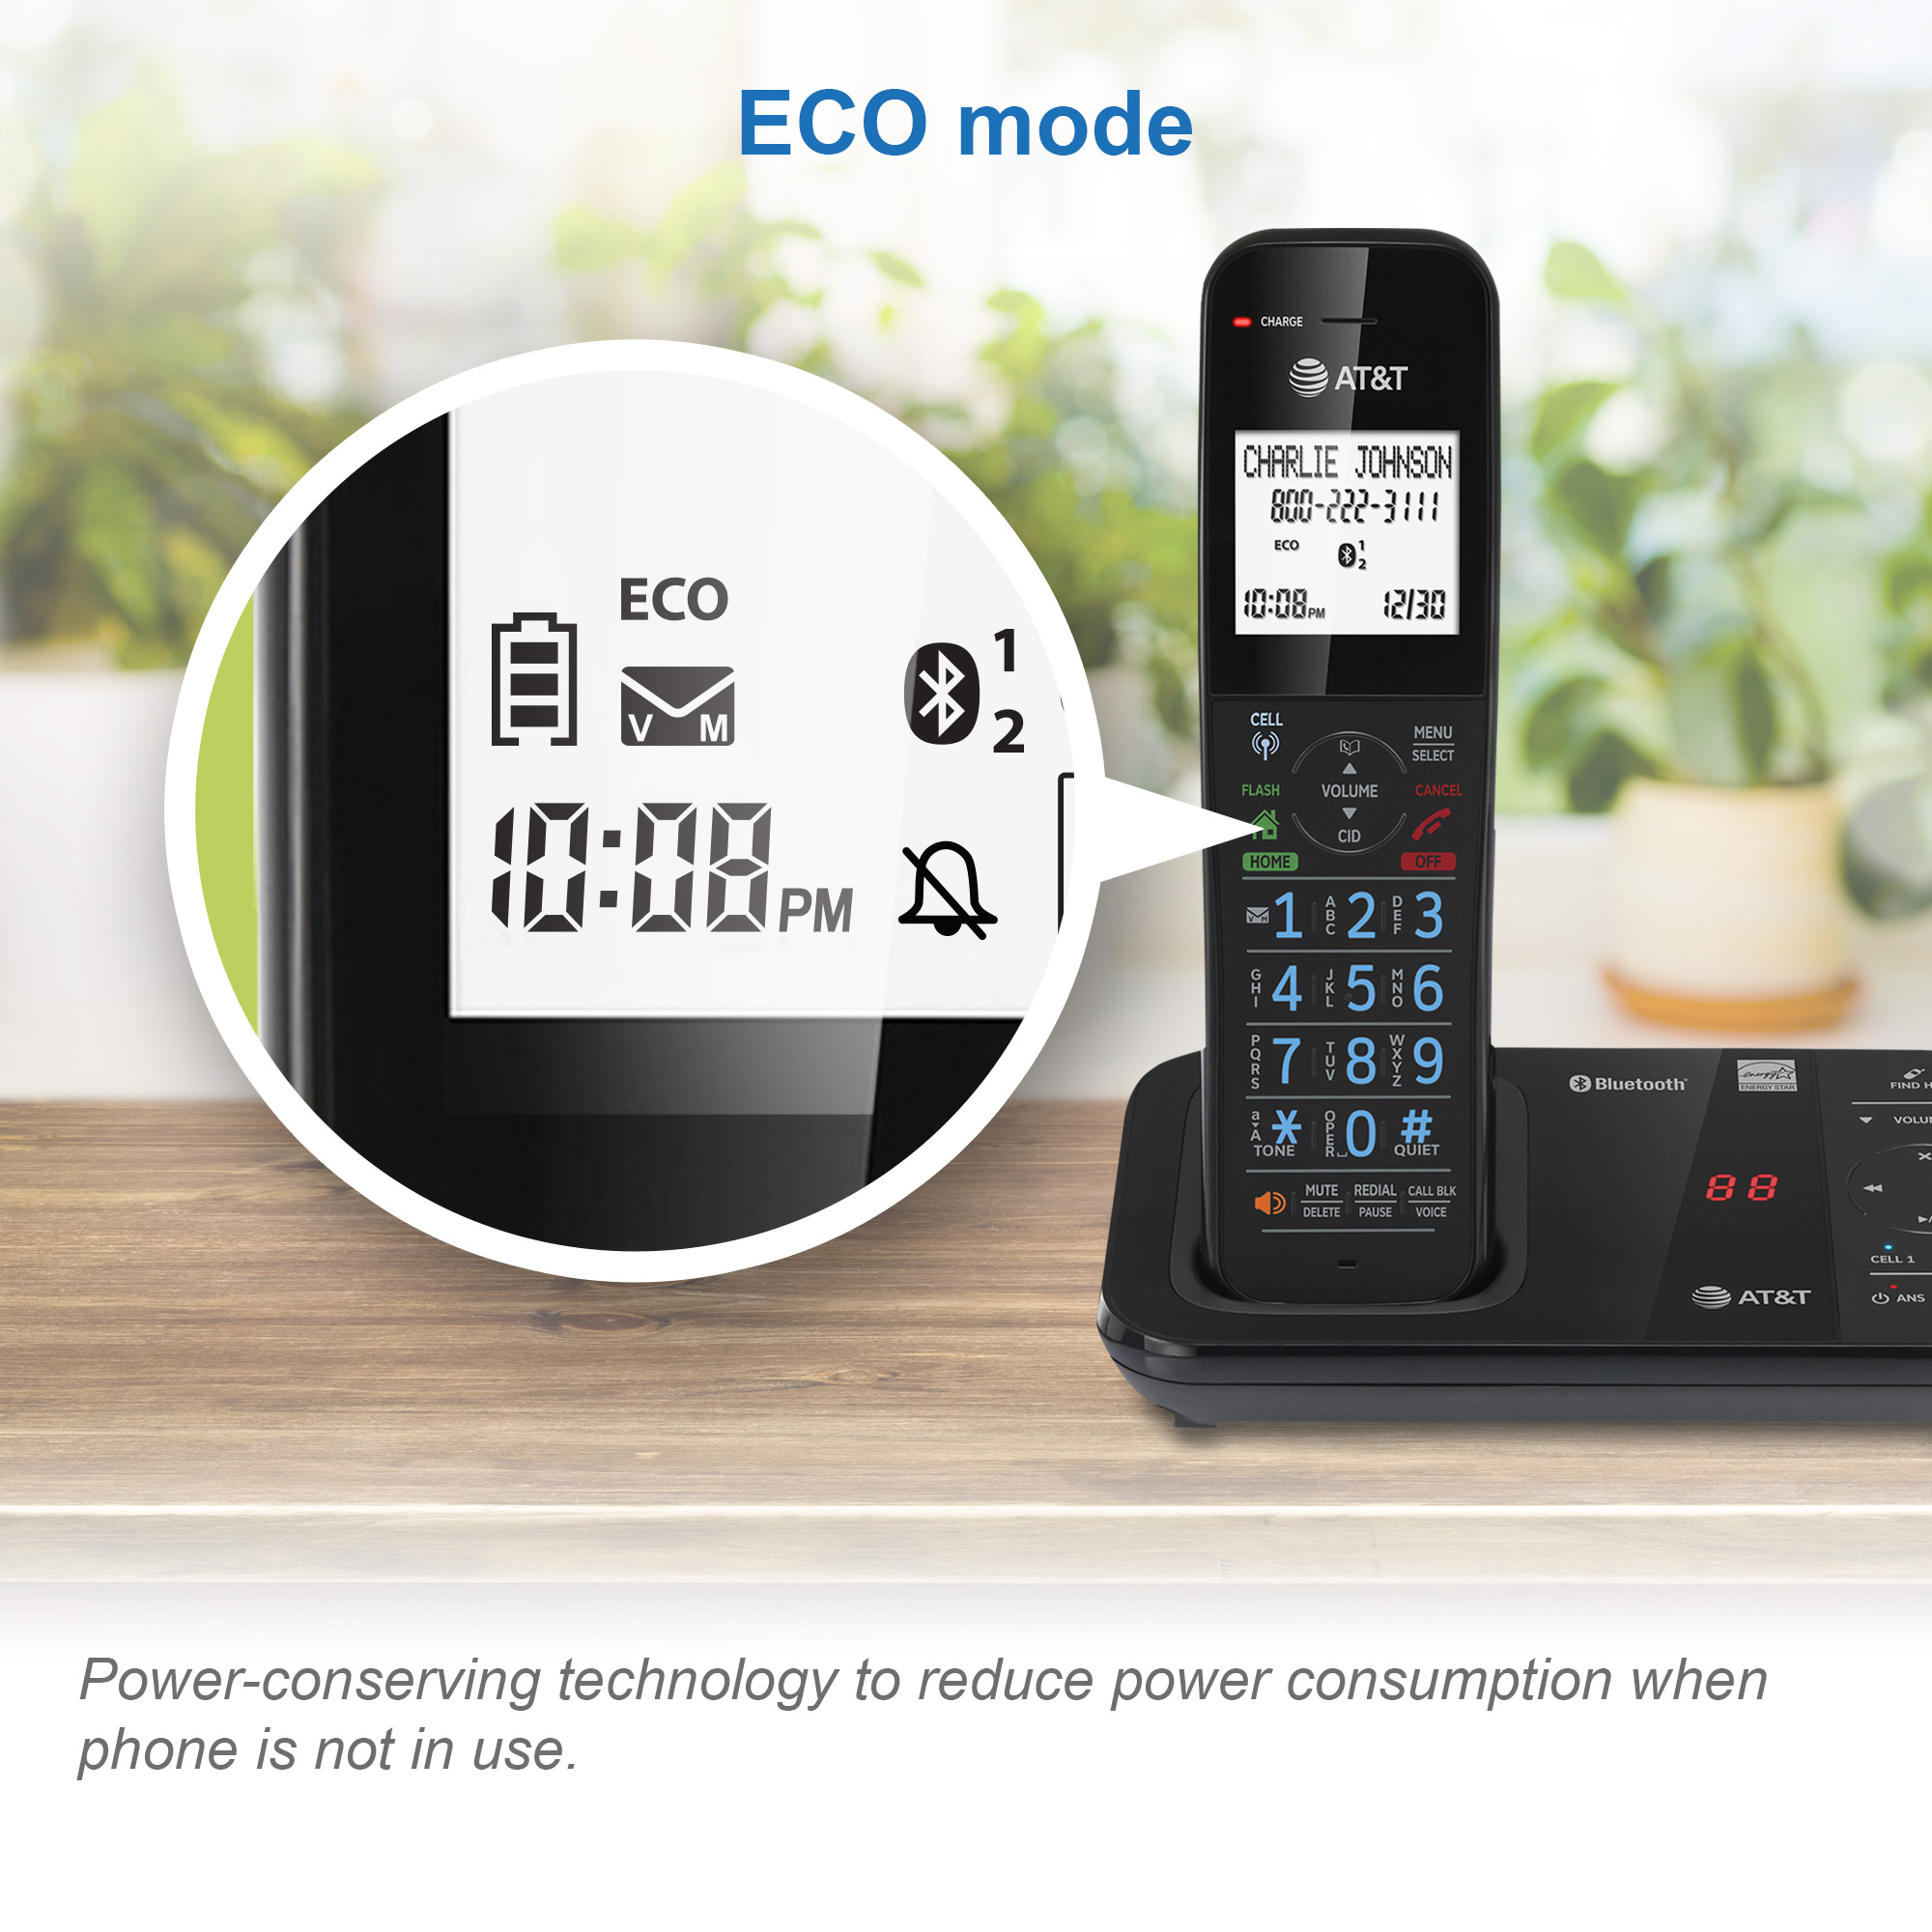 3-Handset Expandable Antibacterial Plastic Cordless Phone with Bluetooth Connect to Cell, Smart Call Blocker and Answering System - view 8